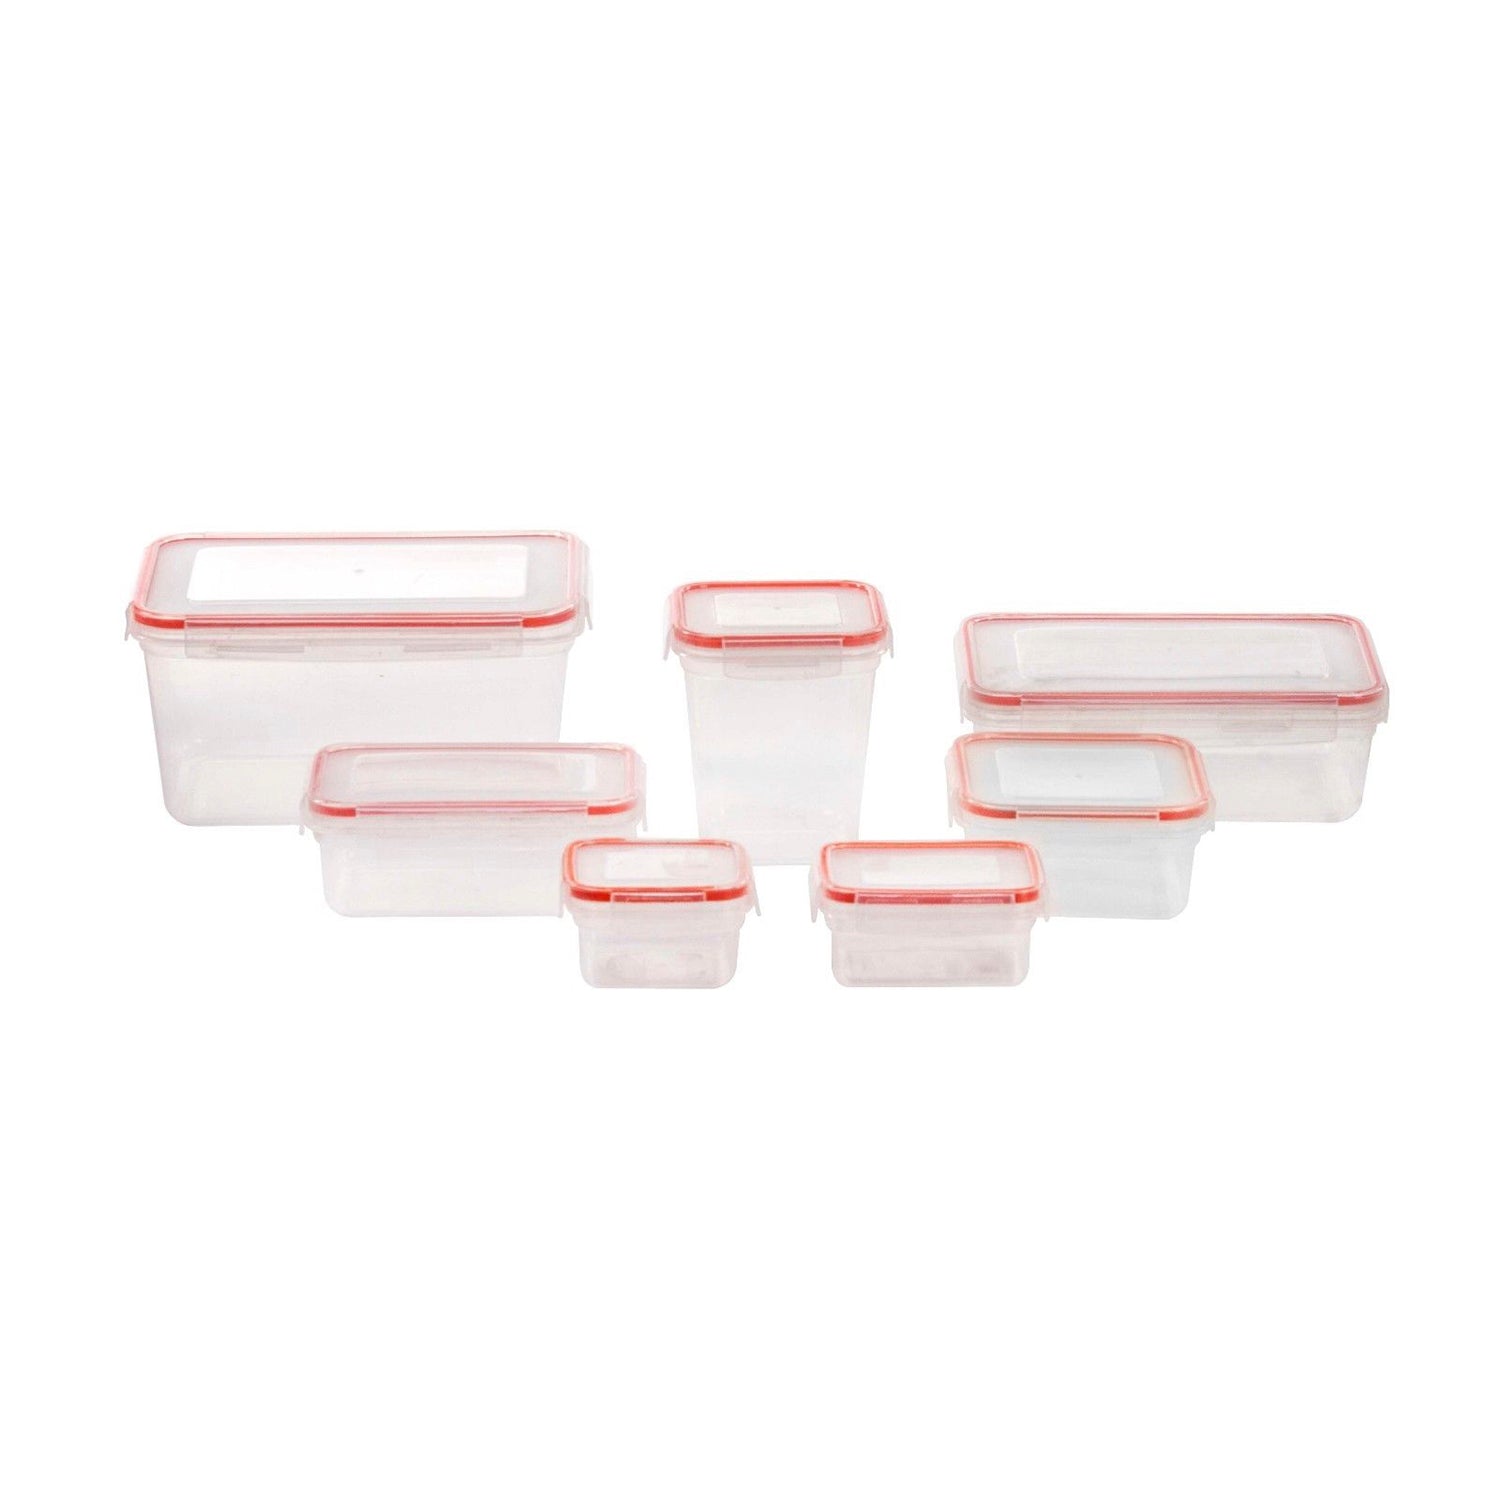 14 Pcs Plastic Food Storage Containers Set With Air Tight Locking Lids